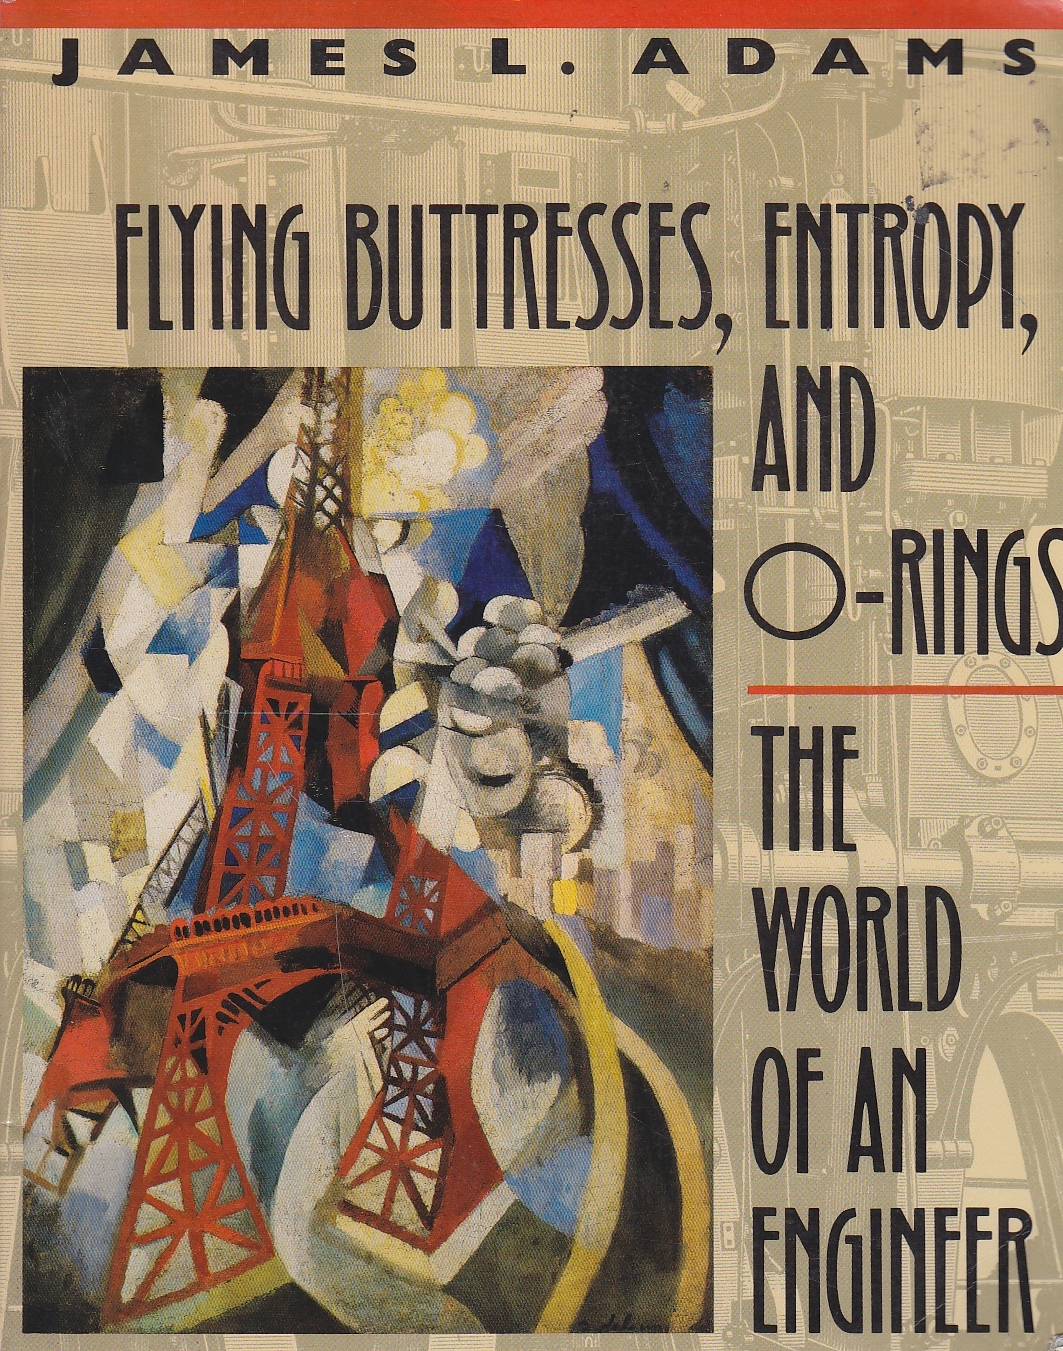 Image for Flying Buttresses, Entropy, and O-Rings The World of an Engineer